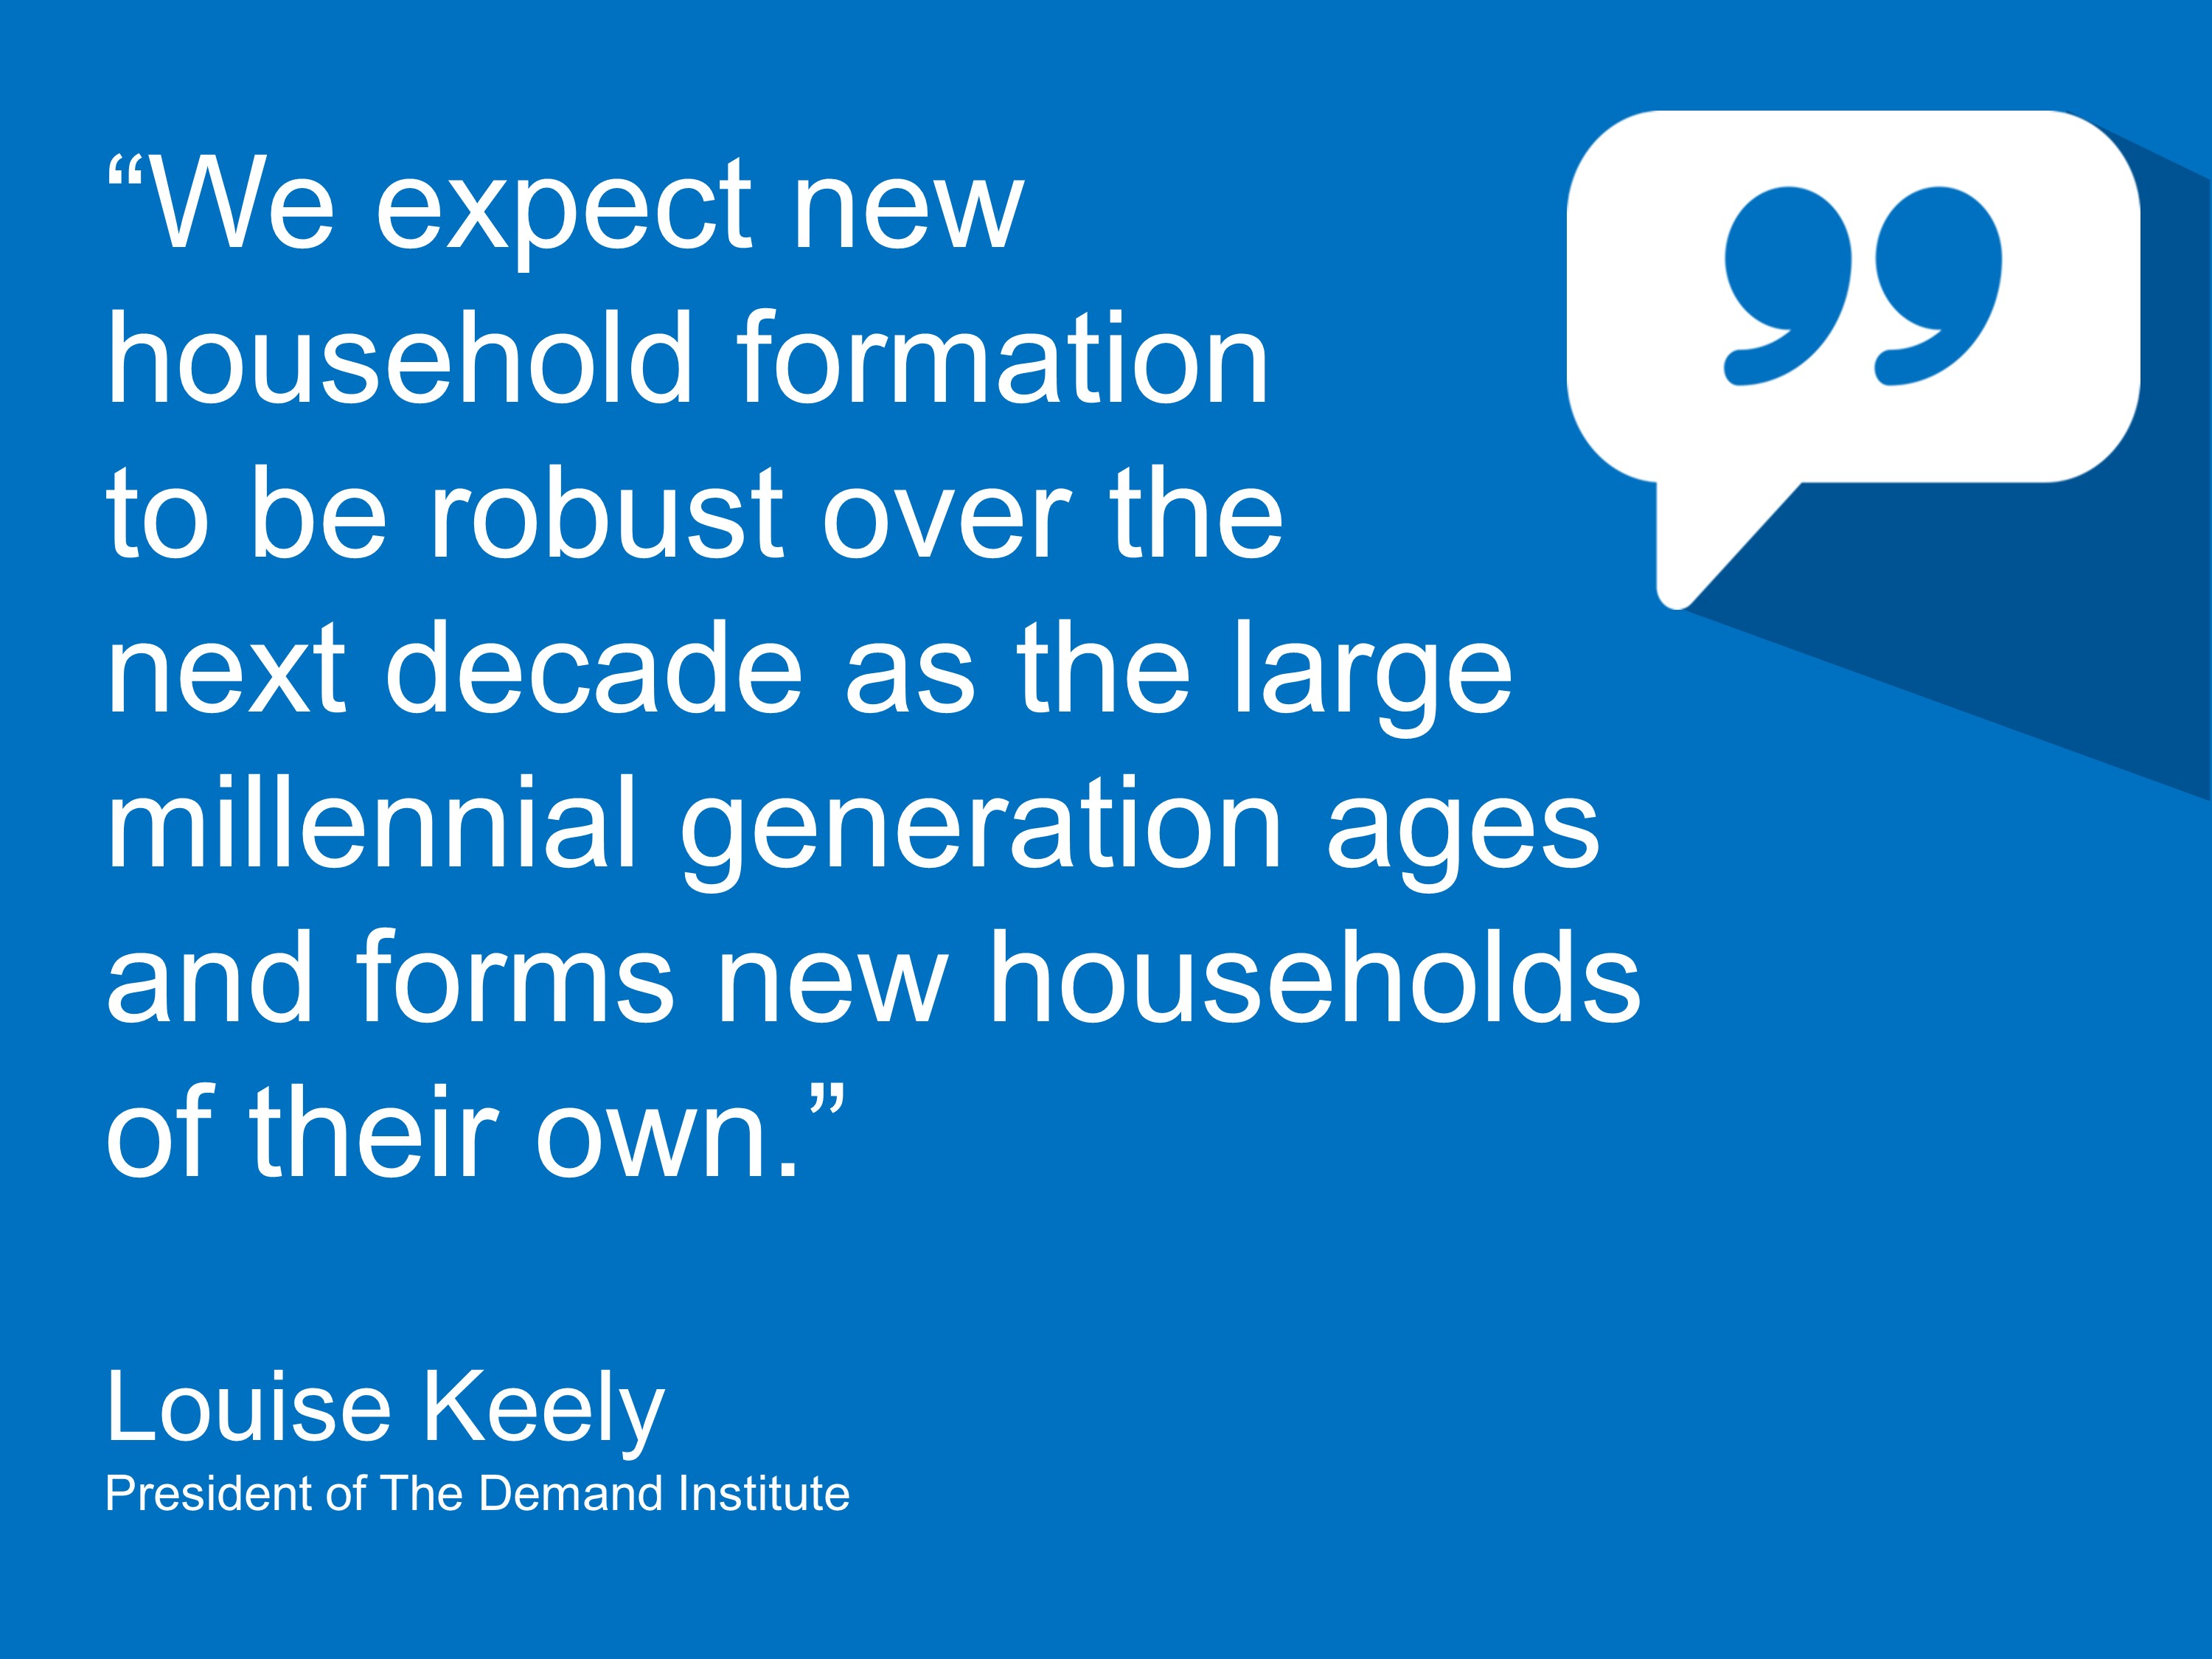 Millennial growth in household formations next decade means greater demand